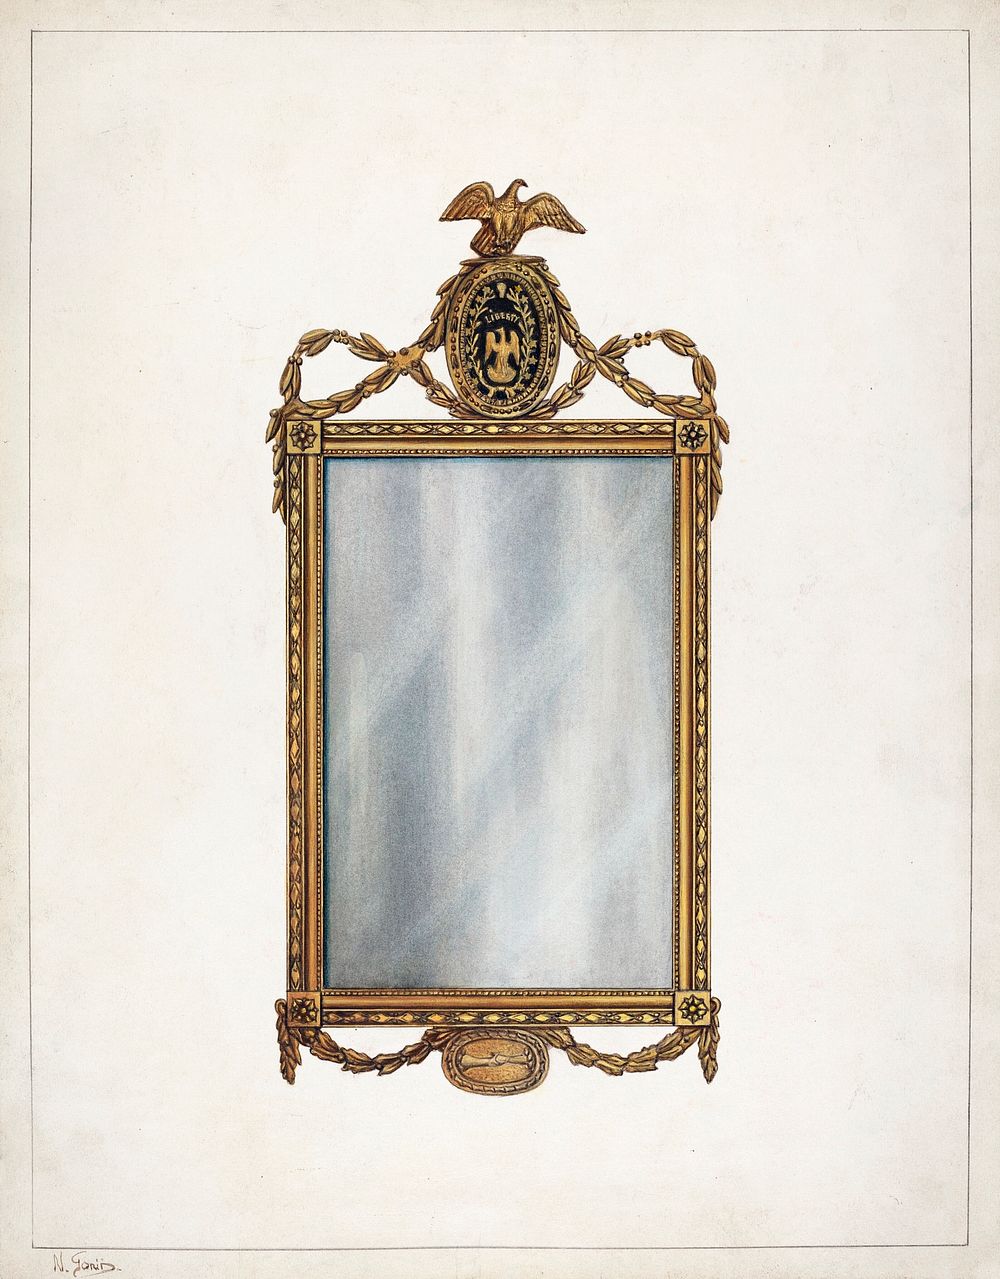 Mirror (1935&ndash;1942) by Nicholas Gorid and Frank Wenger. Original from The National Gallery of Art. Digitally enhanced…